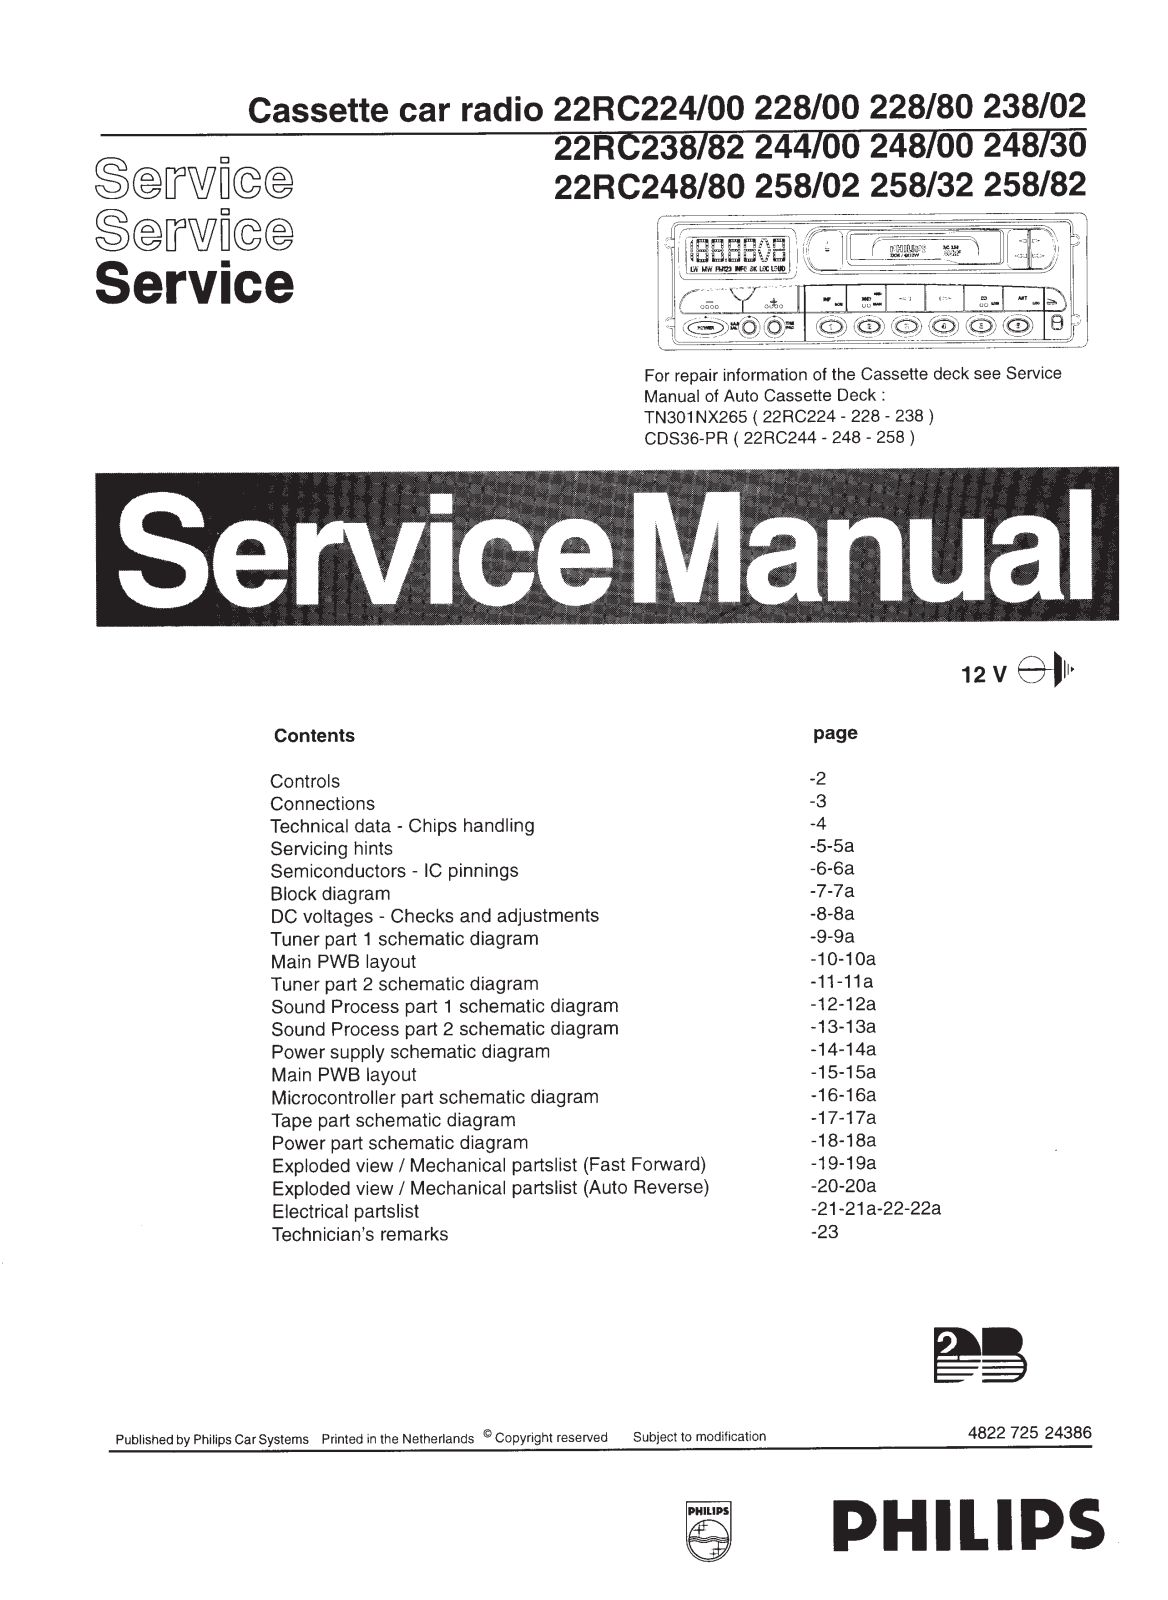 Philips RC-22400, RC-22800, RC-23802, RC-22880, RC-23882 Service manual